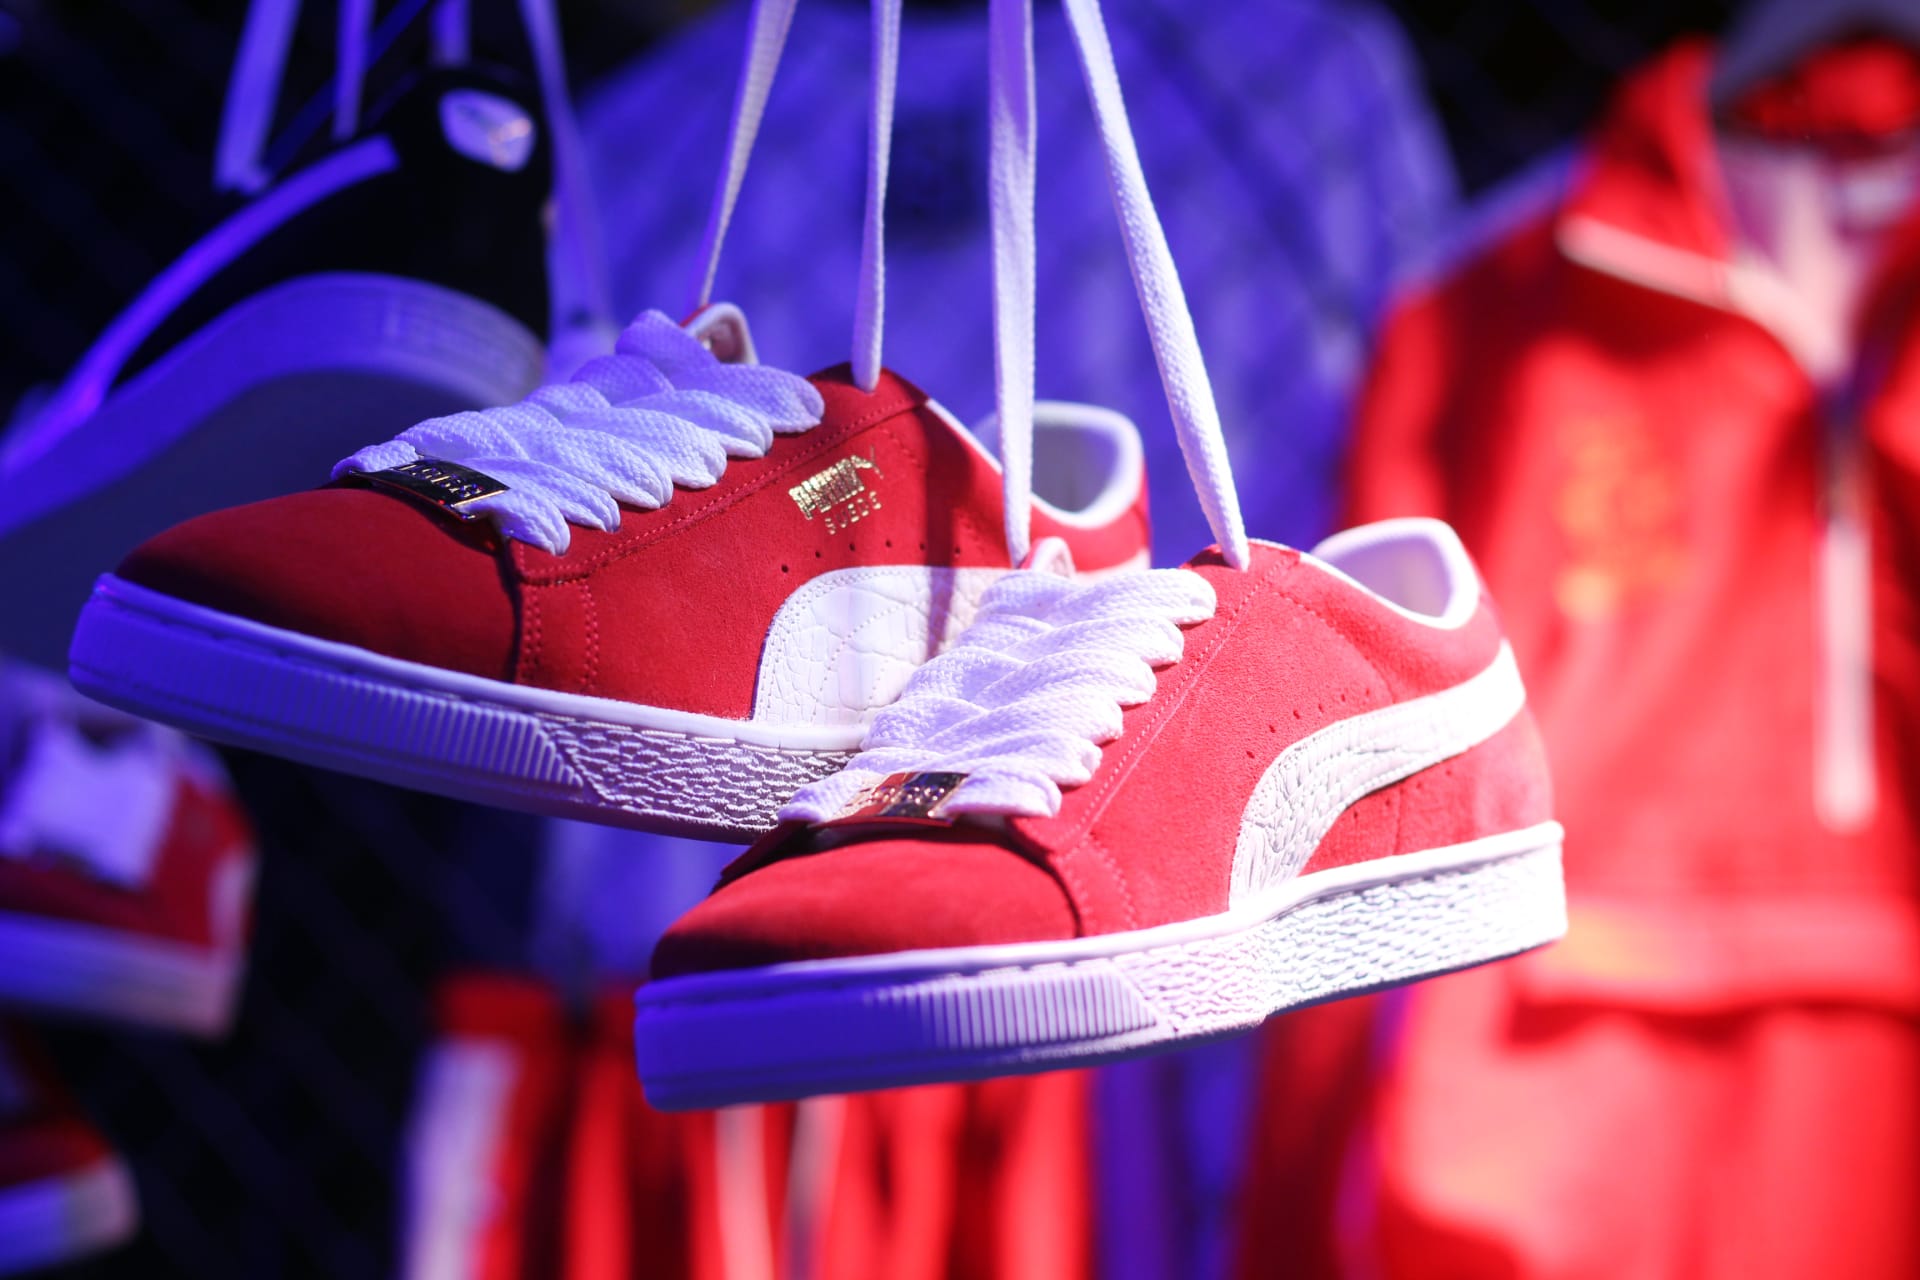 How The PUMA Suede Became The Most Influential Sneaker In Hip Hop